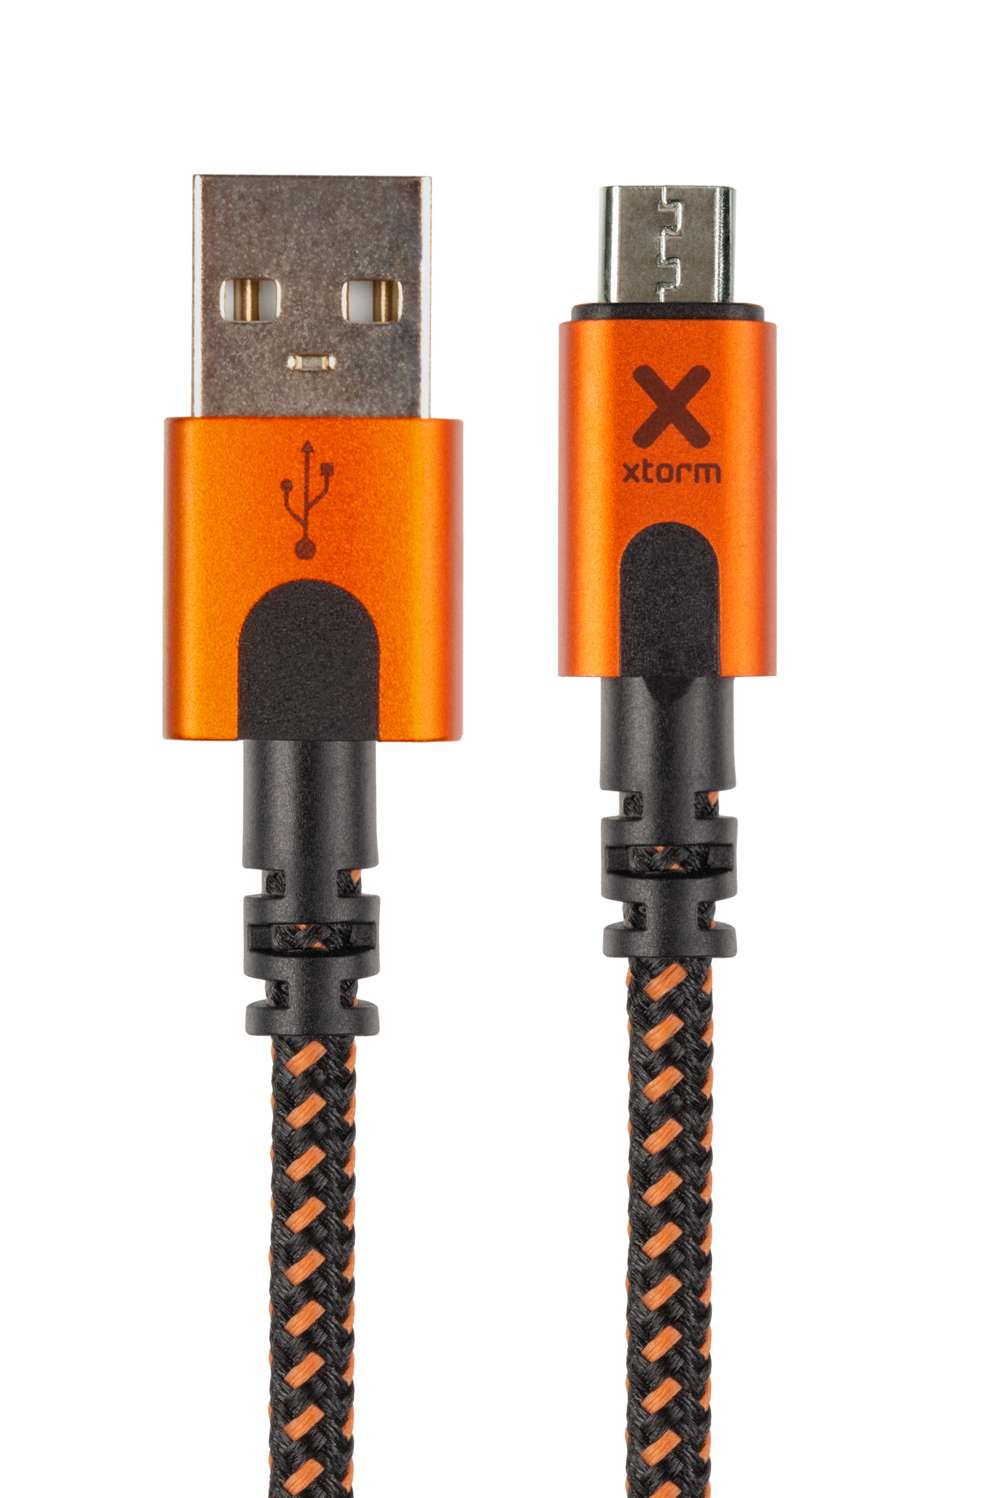 Xtreme USB to Micro USB Cable - 1.5 meter - Xtorm NL